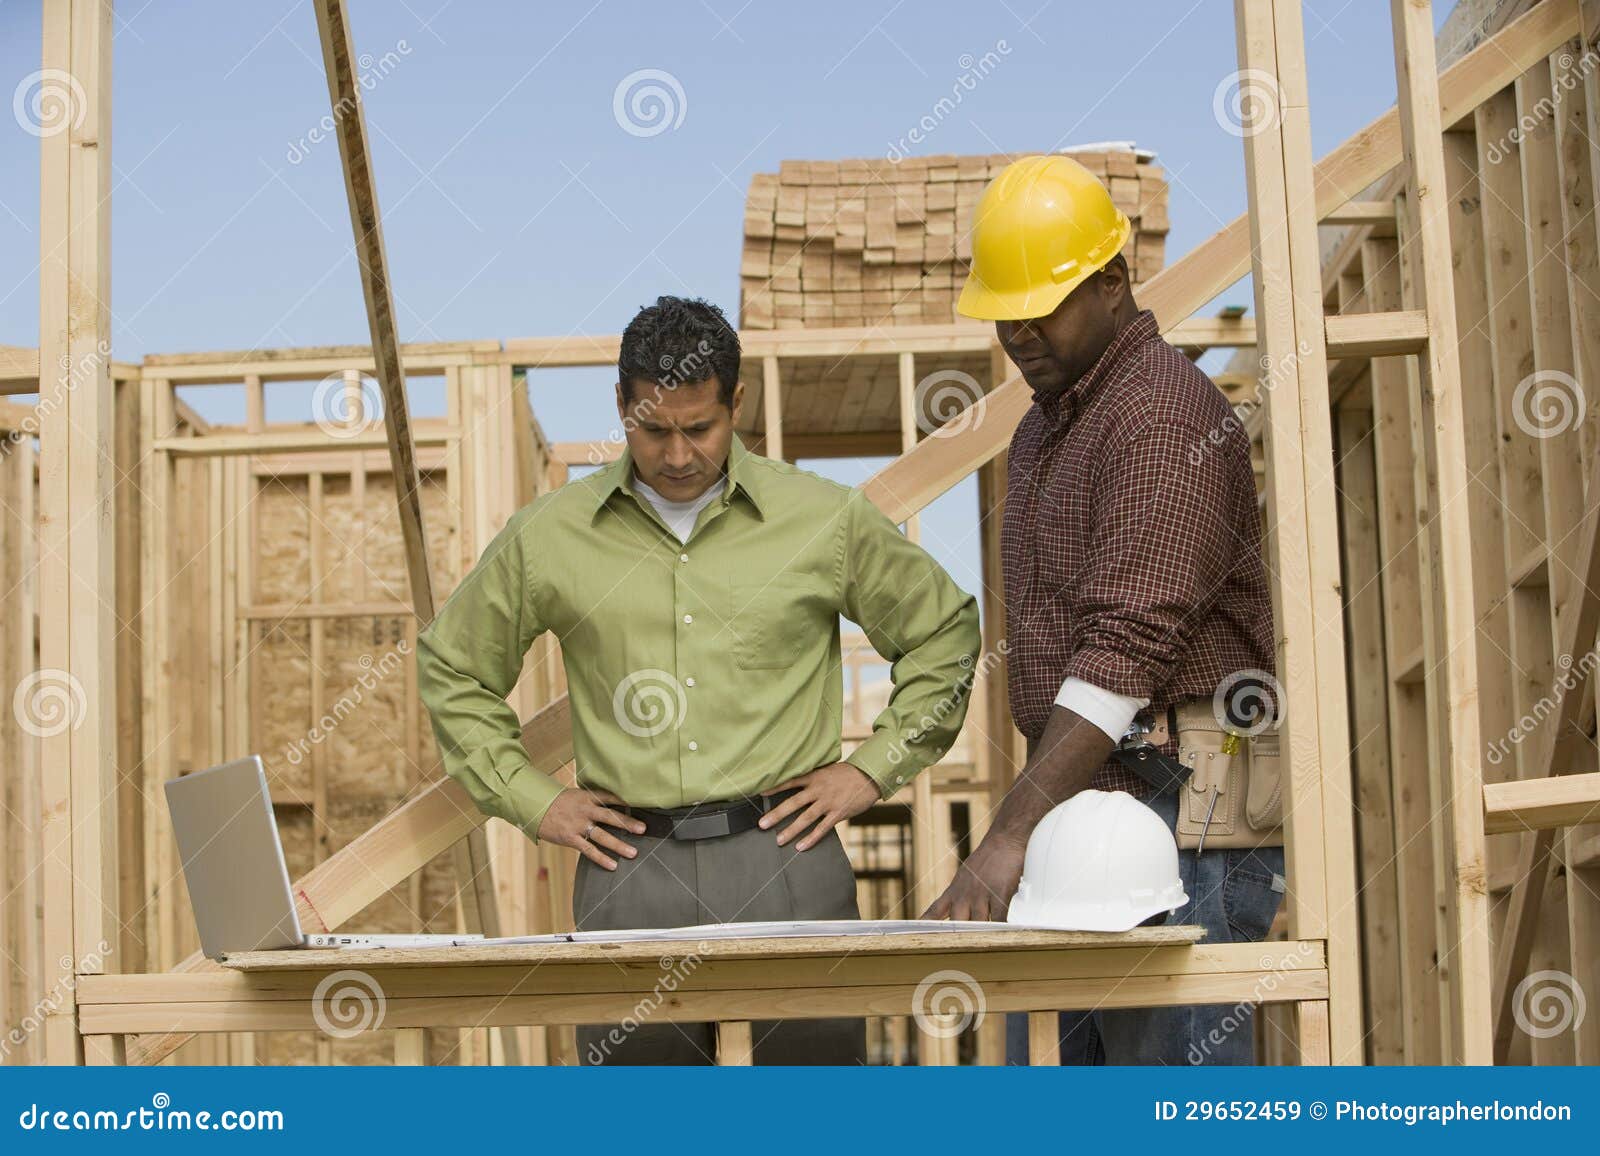 engineer and foreman discussing plans